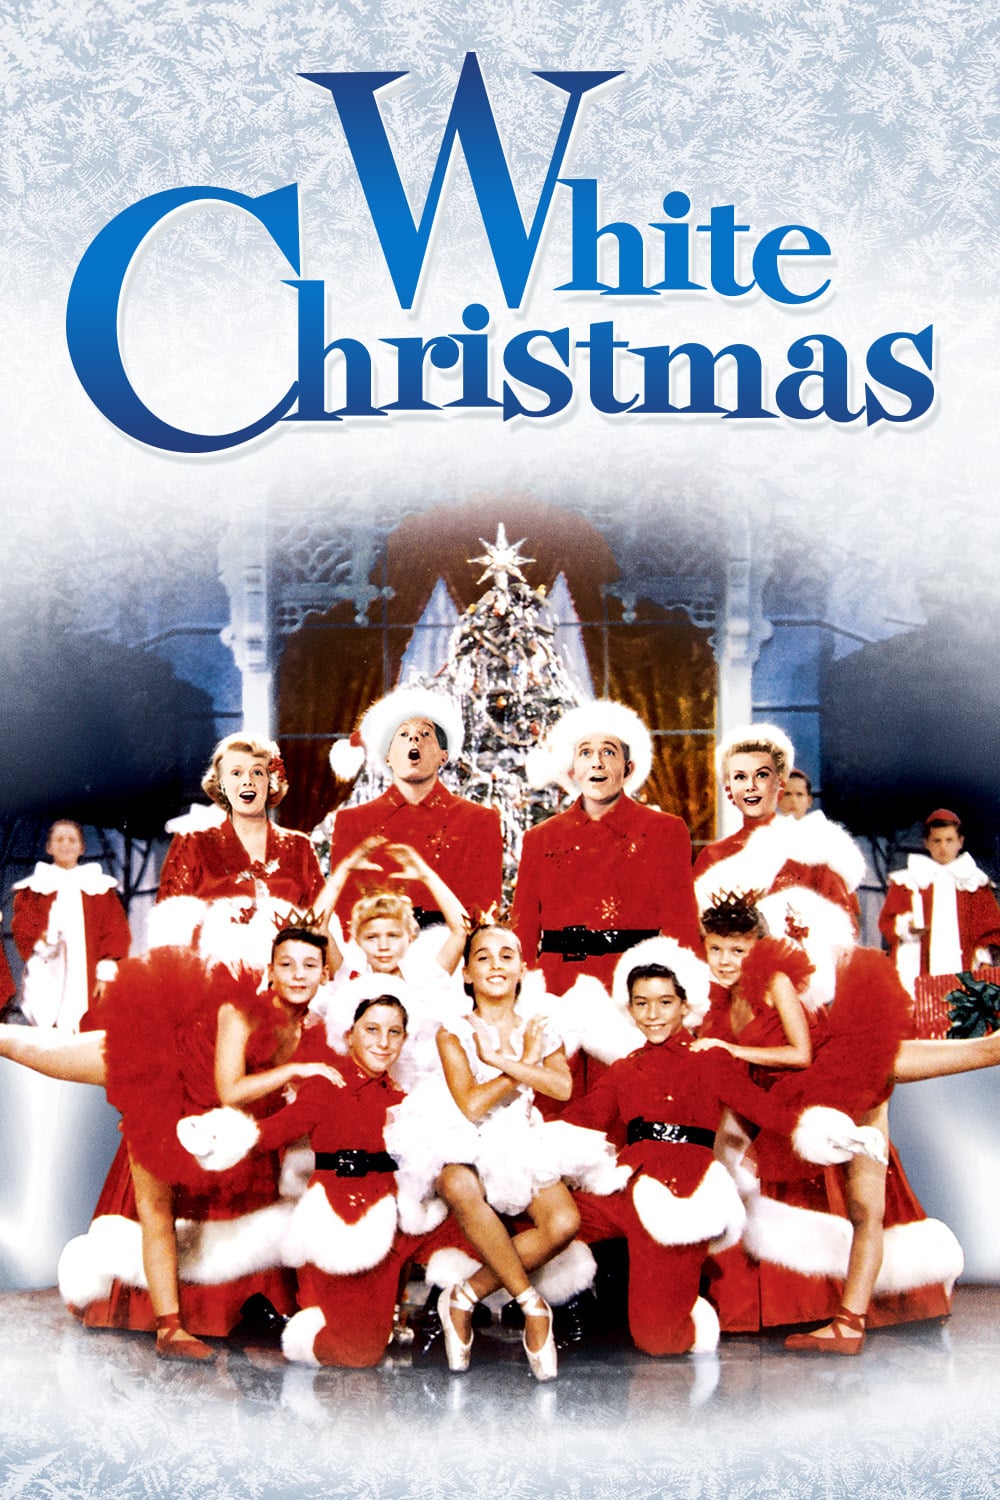 Poster for the movie "White Christmas"